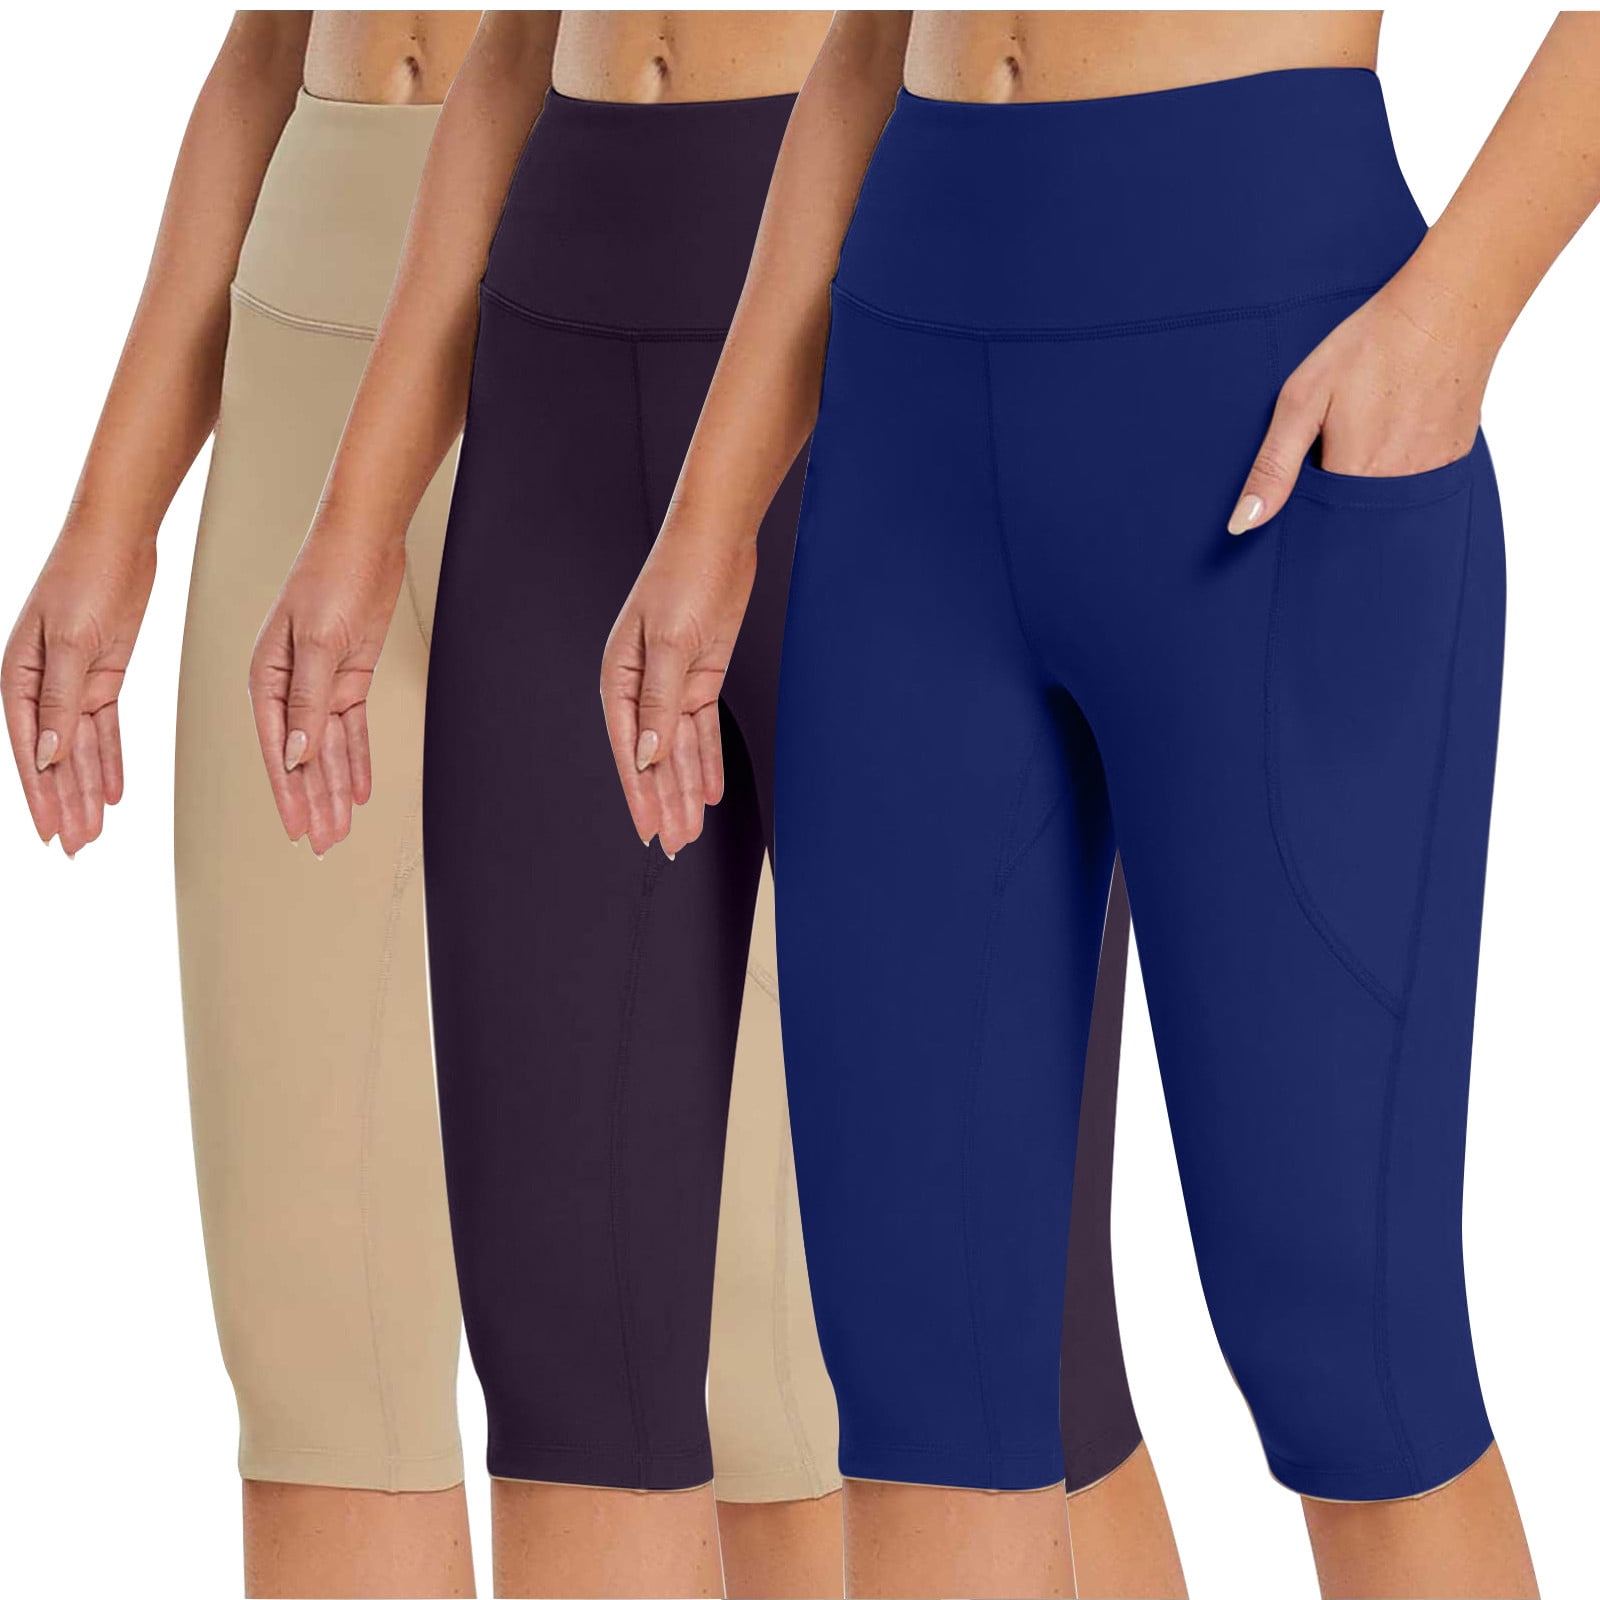 Buy BALEAF Women's Knee Length Cotton Capri Leggings with Pockets, High  Waisted Casual Summer Yoga Workout Exercise Pants, Dark Blue, XL at  Amazon.in